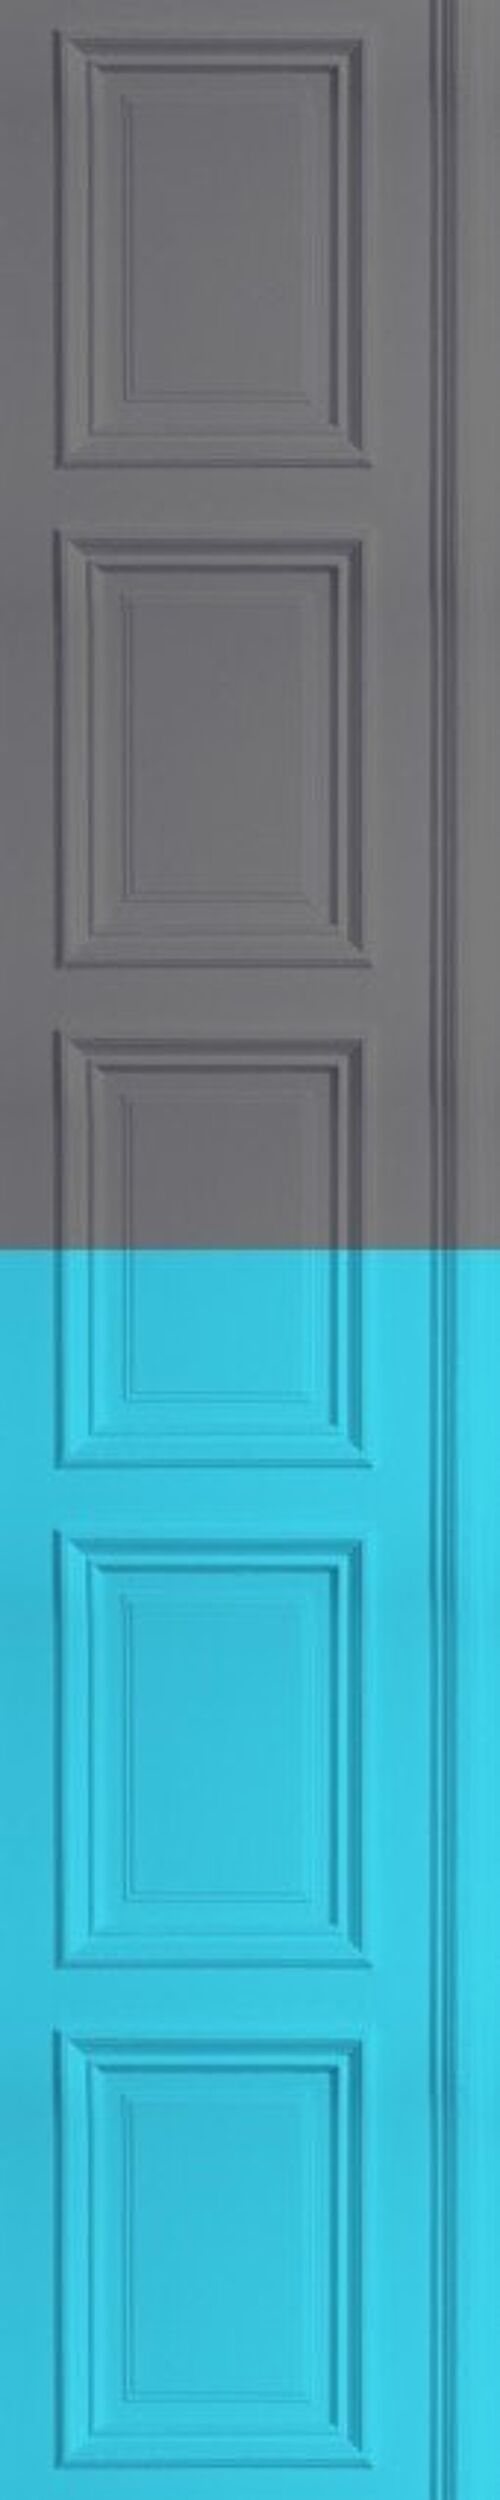 Grey/ Turquoise  Panelling Wallpaper